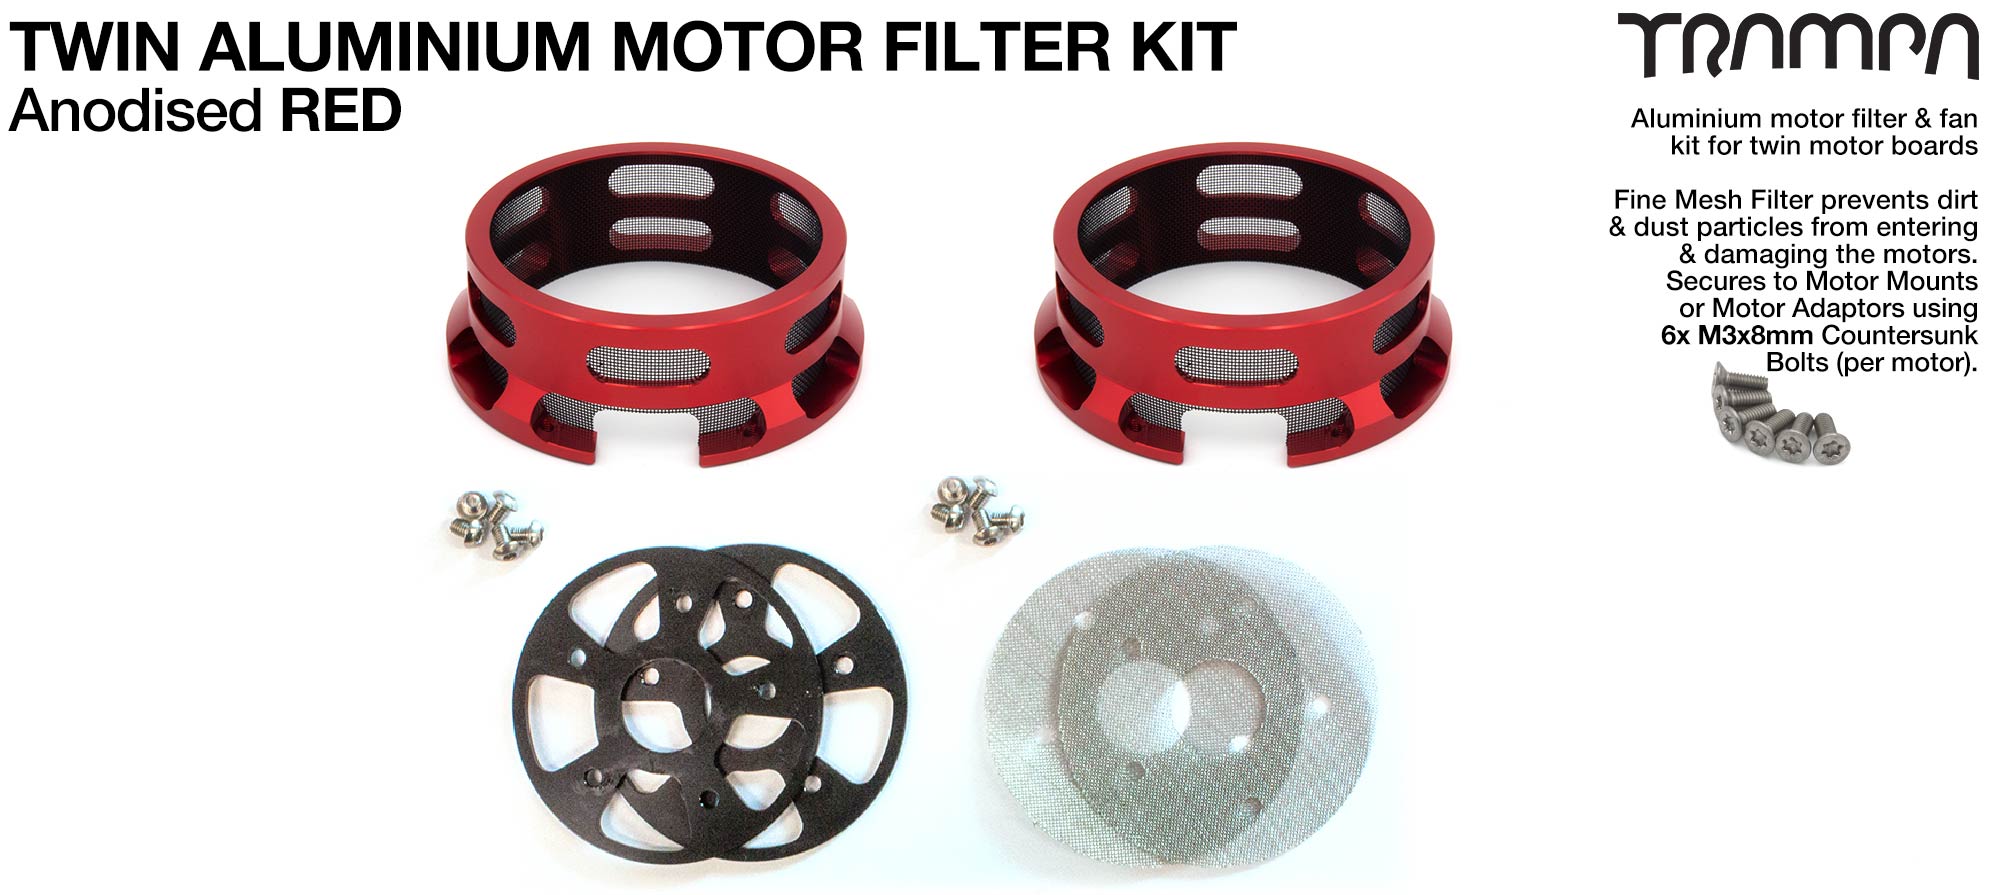 HALF CAGE Motor protection  - RED anodised with Filters - TWIN